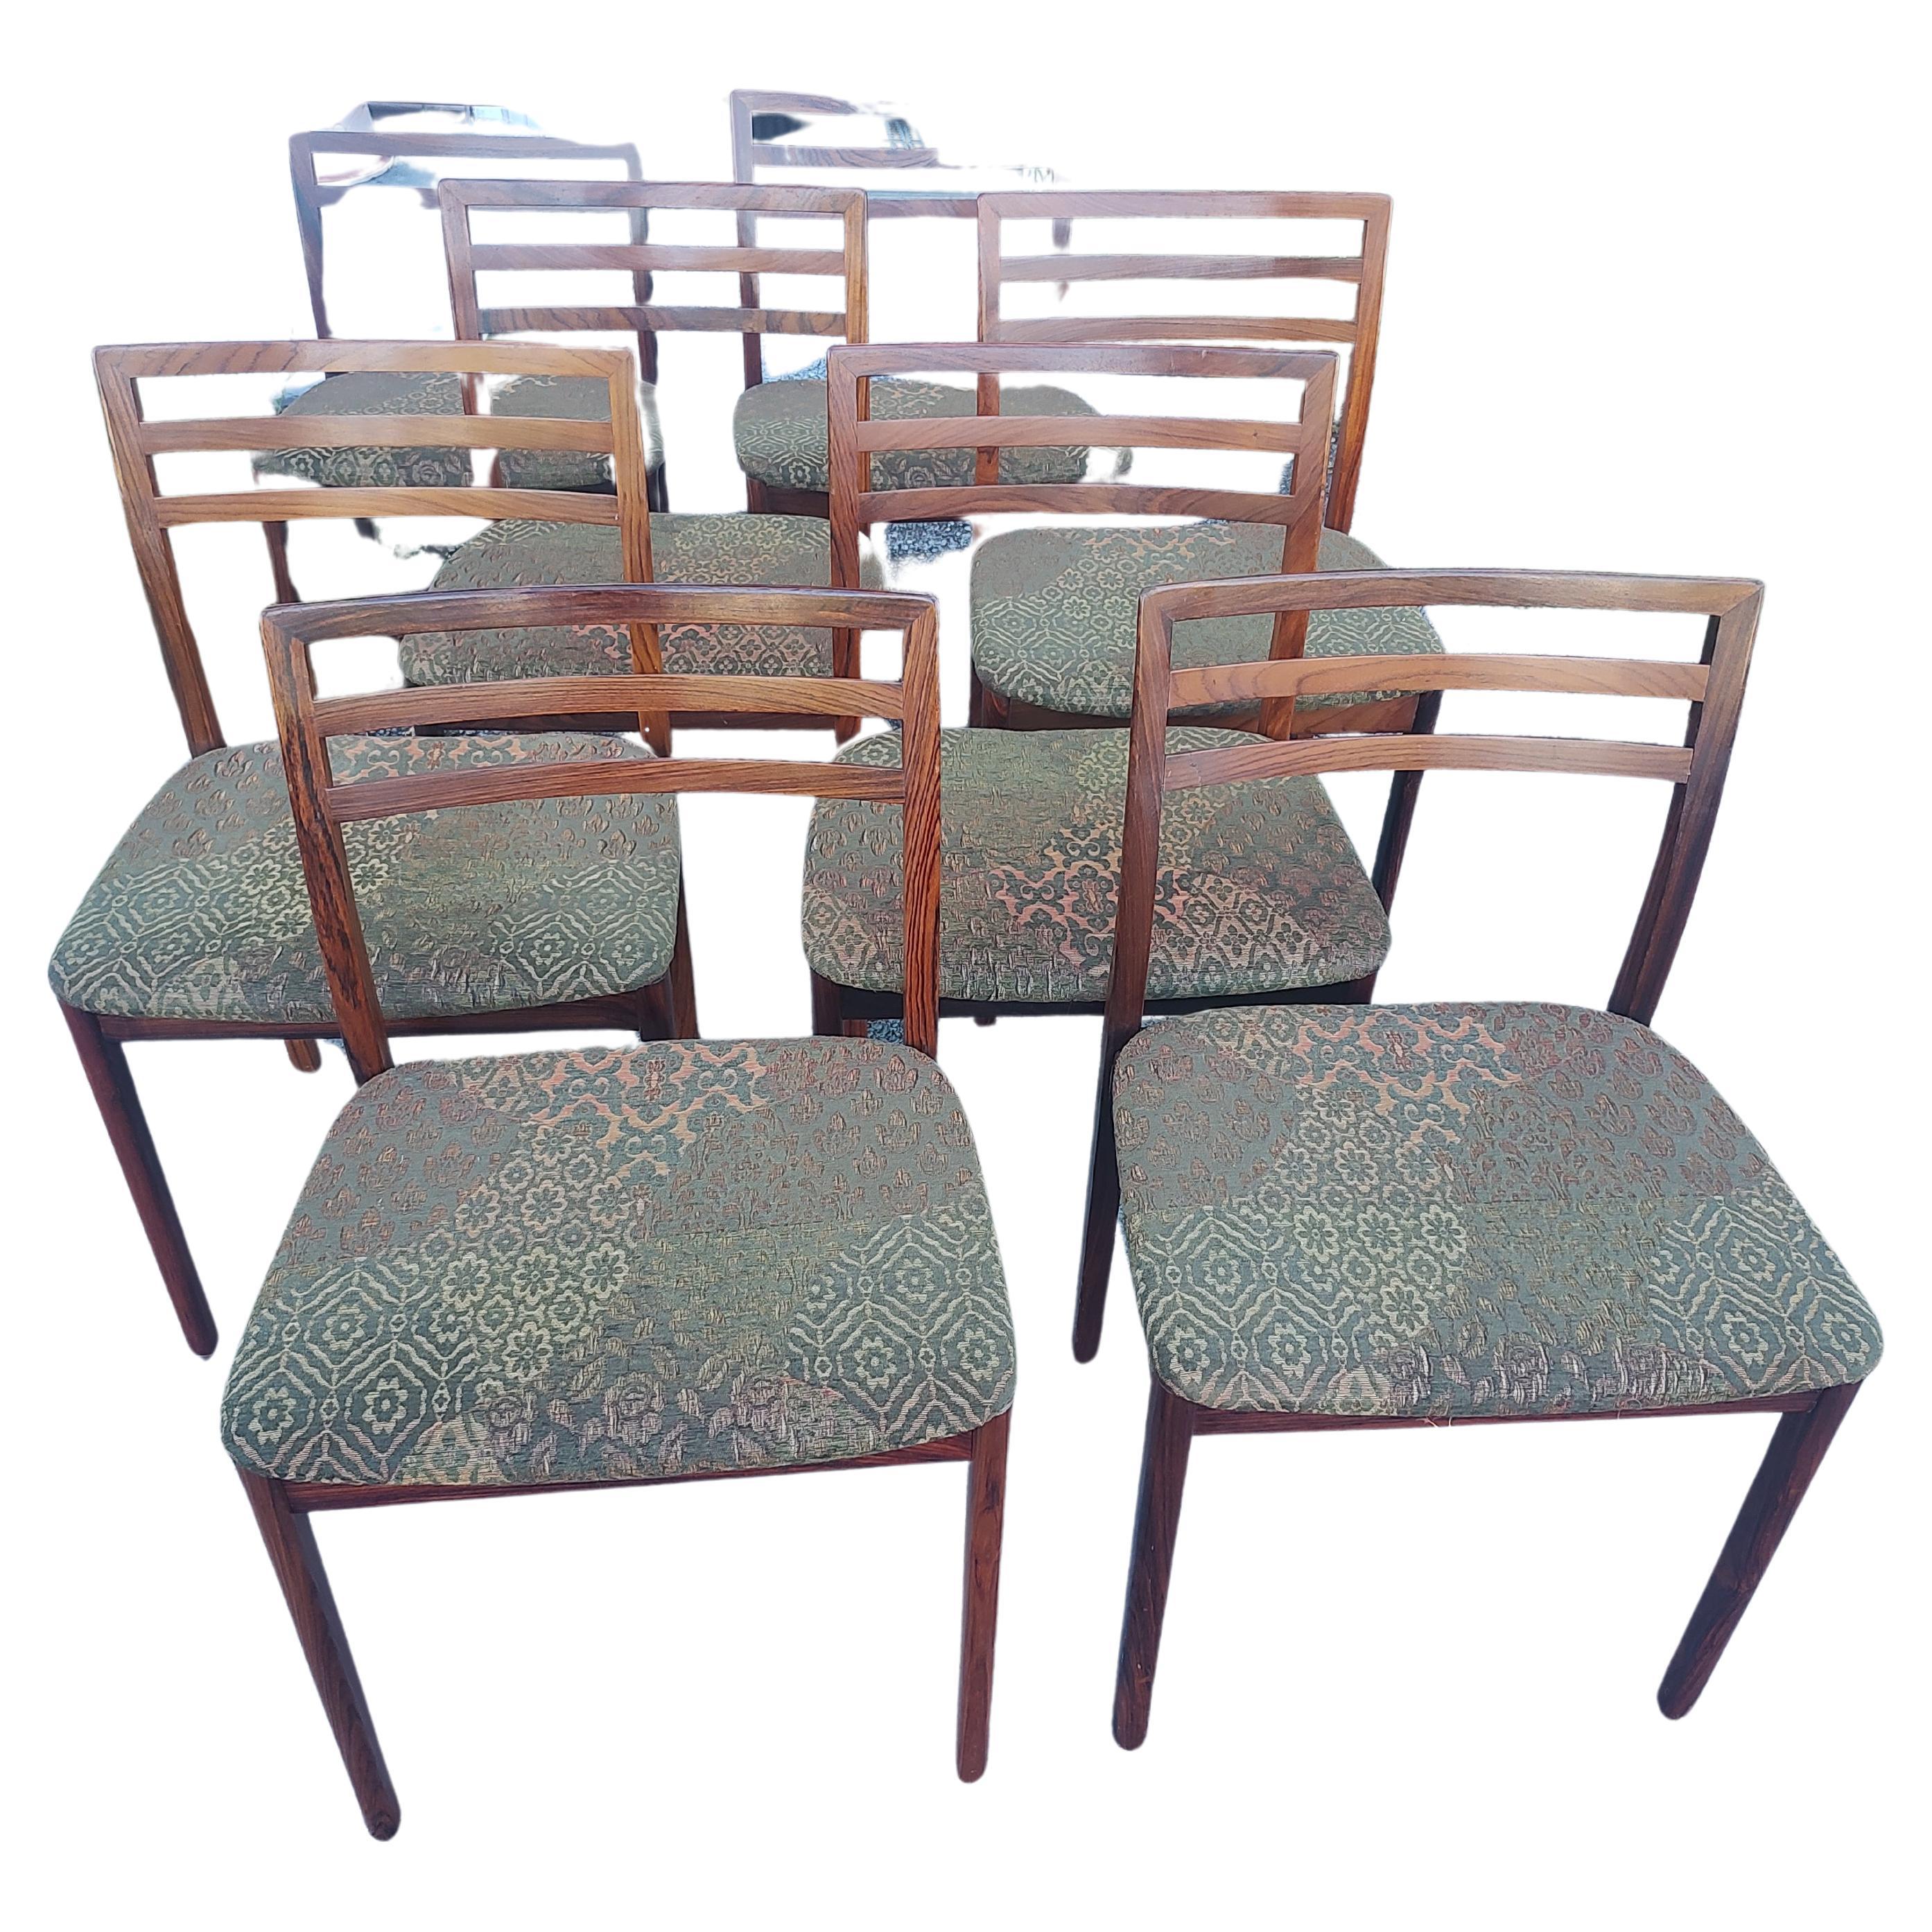 Eight Mid Century Danish Rosewood Ladderback Dining Chairs by Niels Moeller